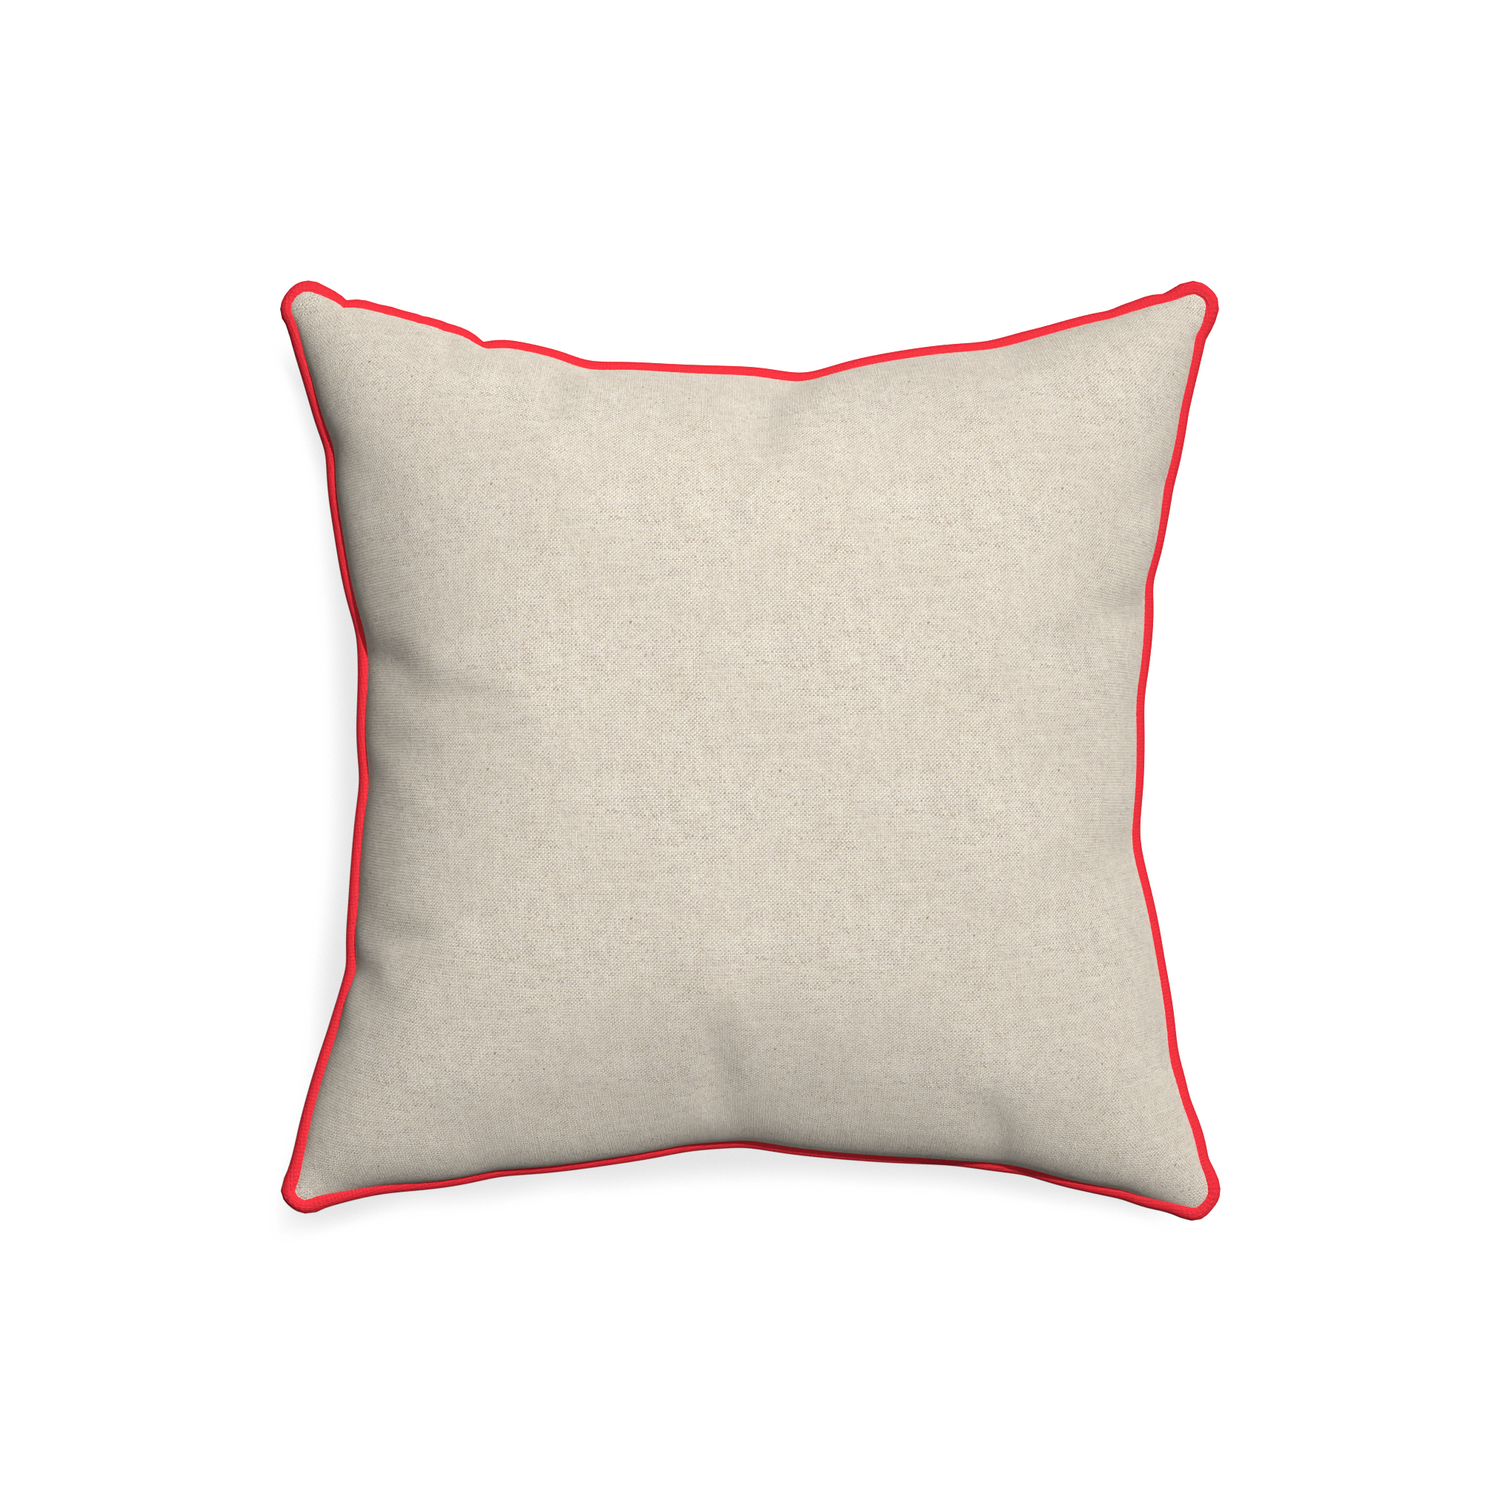 20-square oat custom light brownpillow with cherry piping on white background